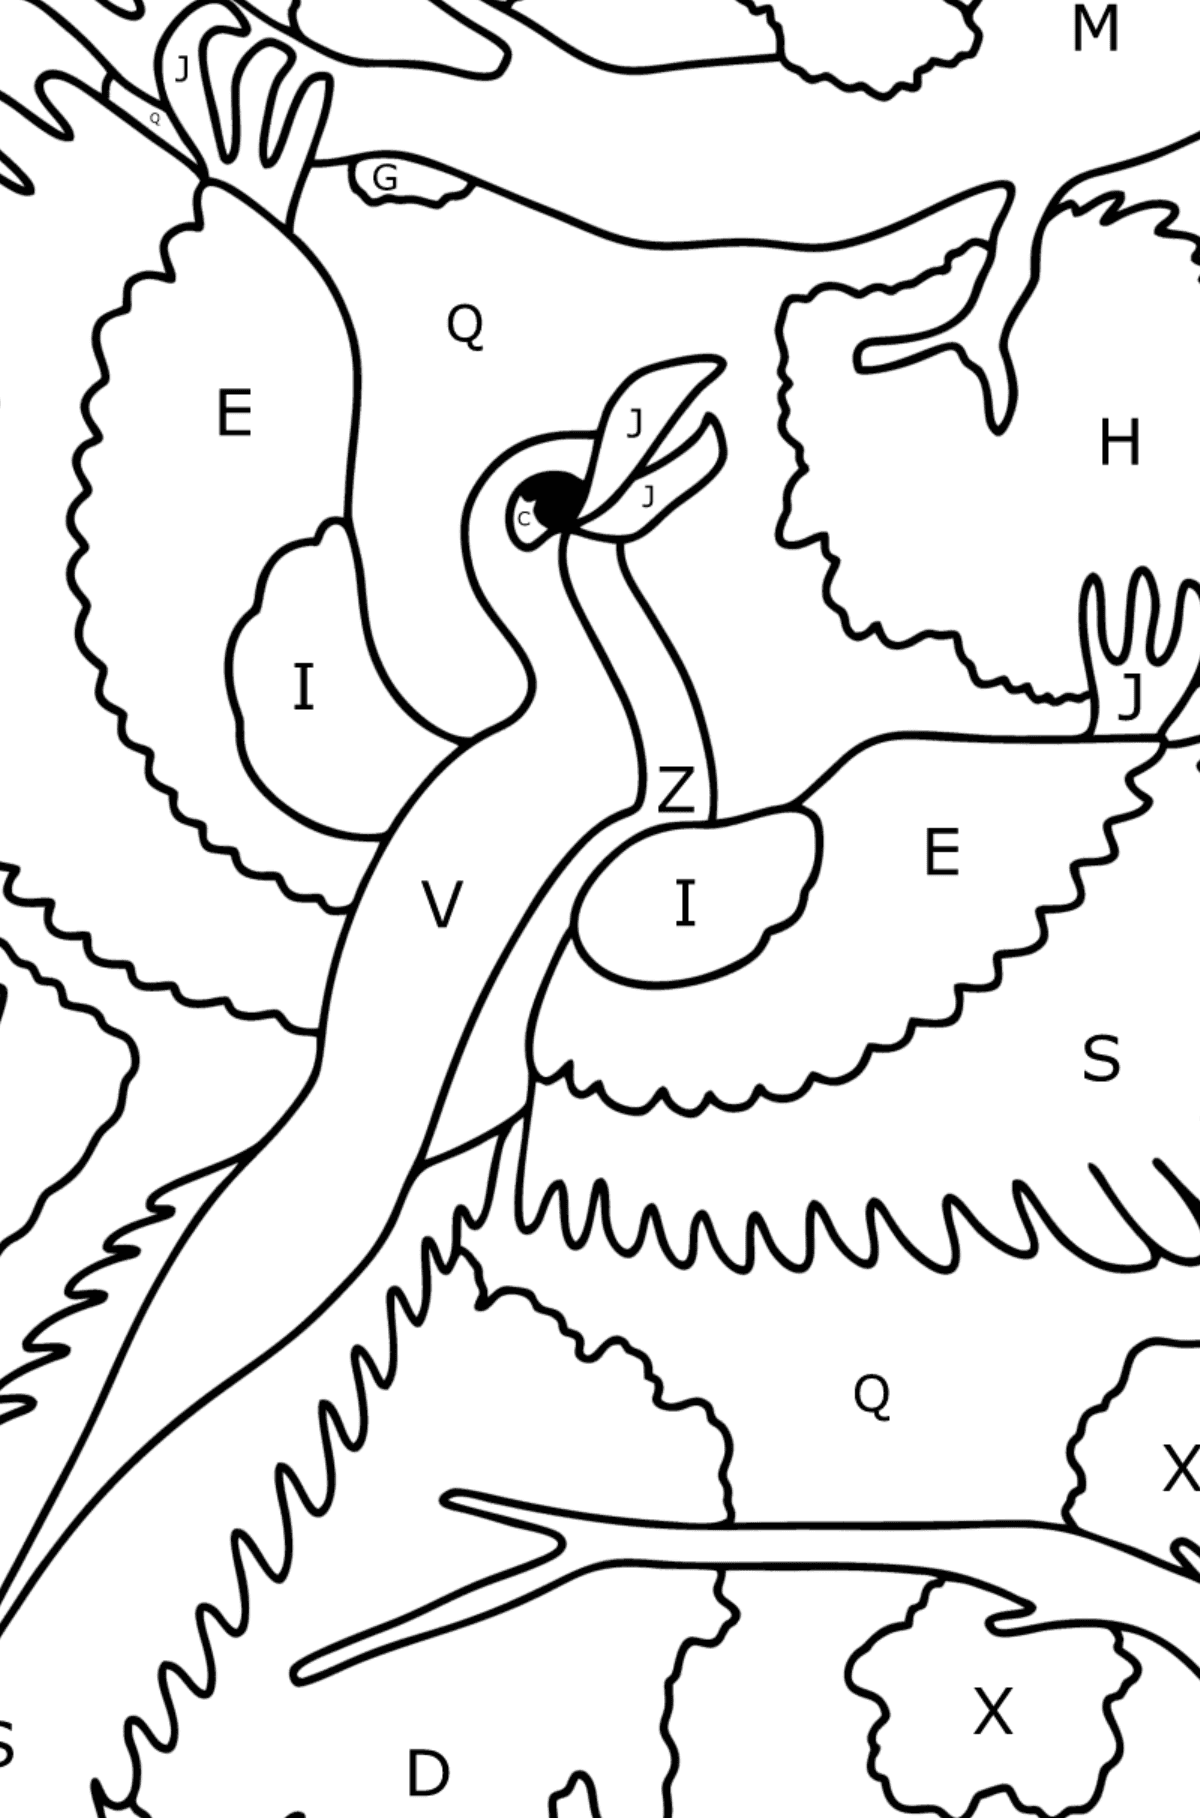 Archeopteryx coloring page - Coloring by Letters for Kids